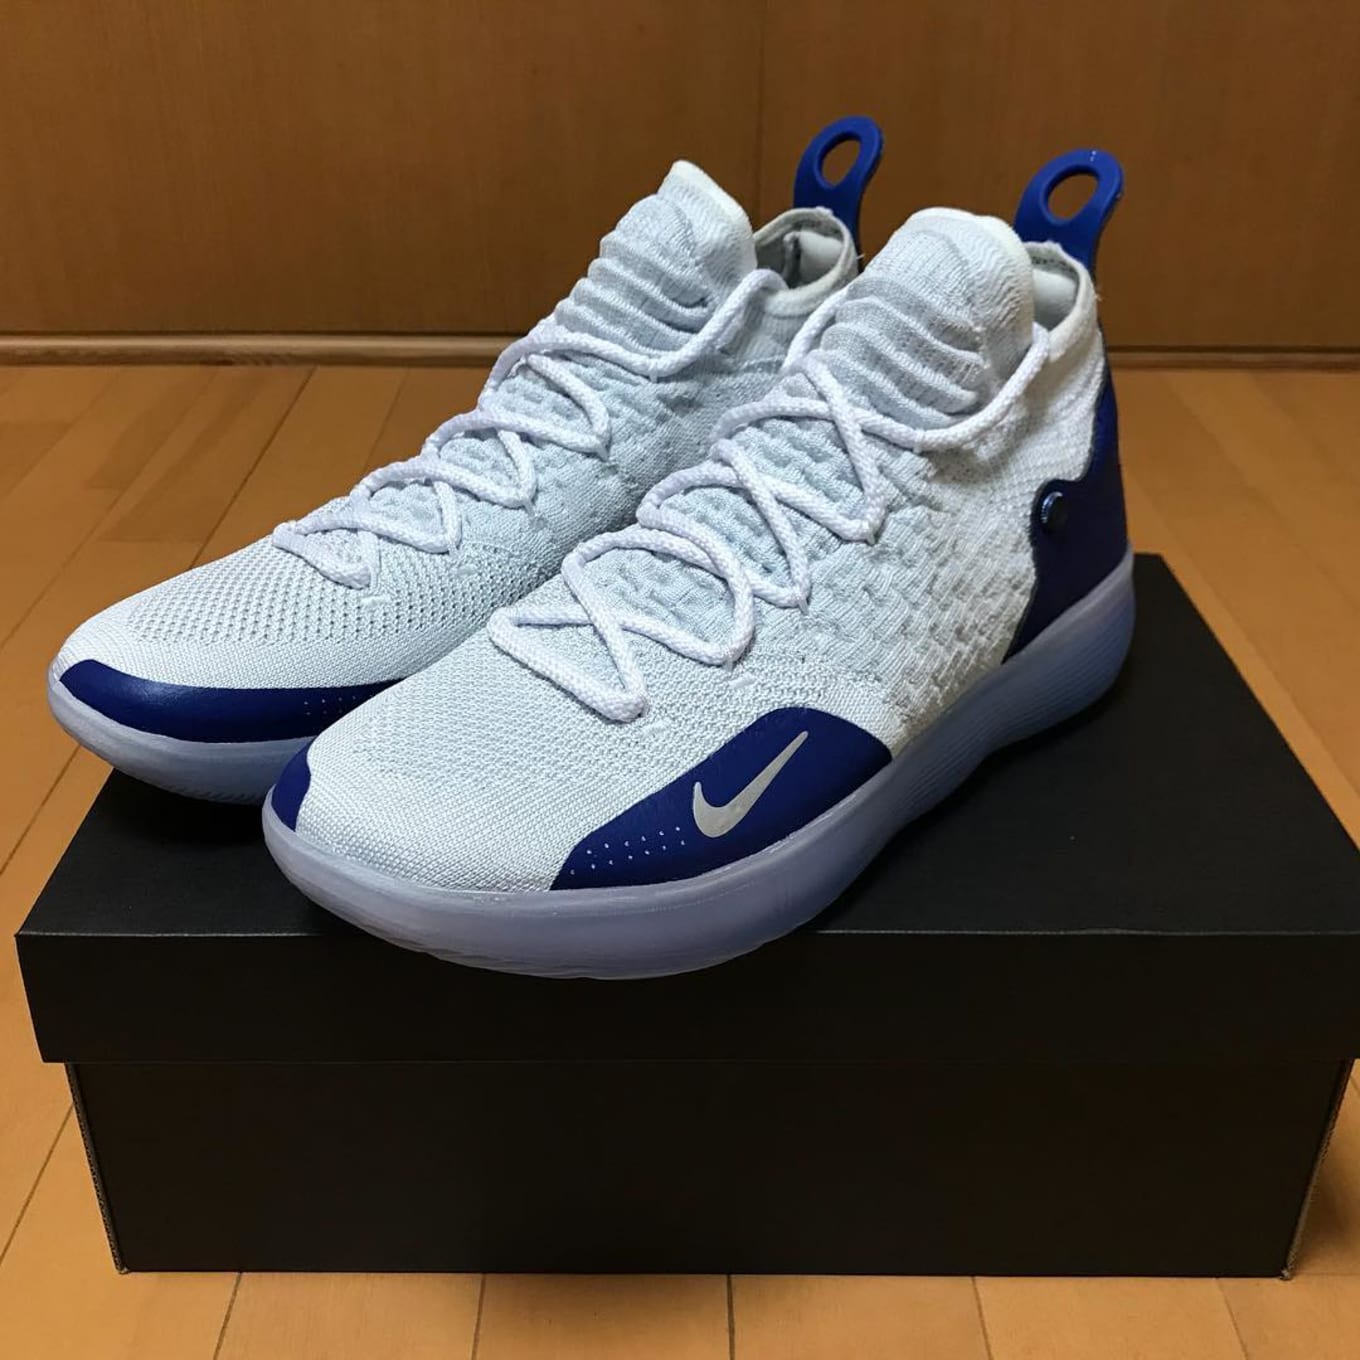 kd 11 white and blue